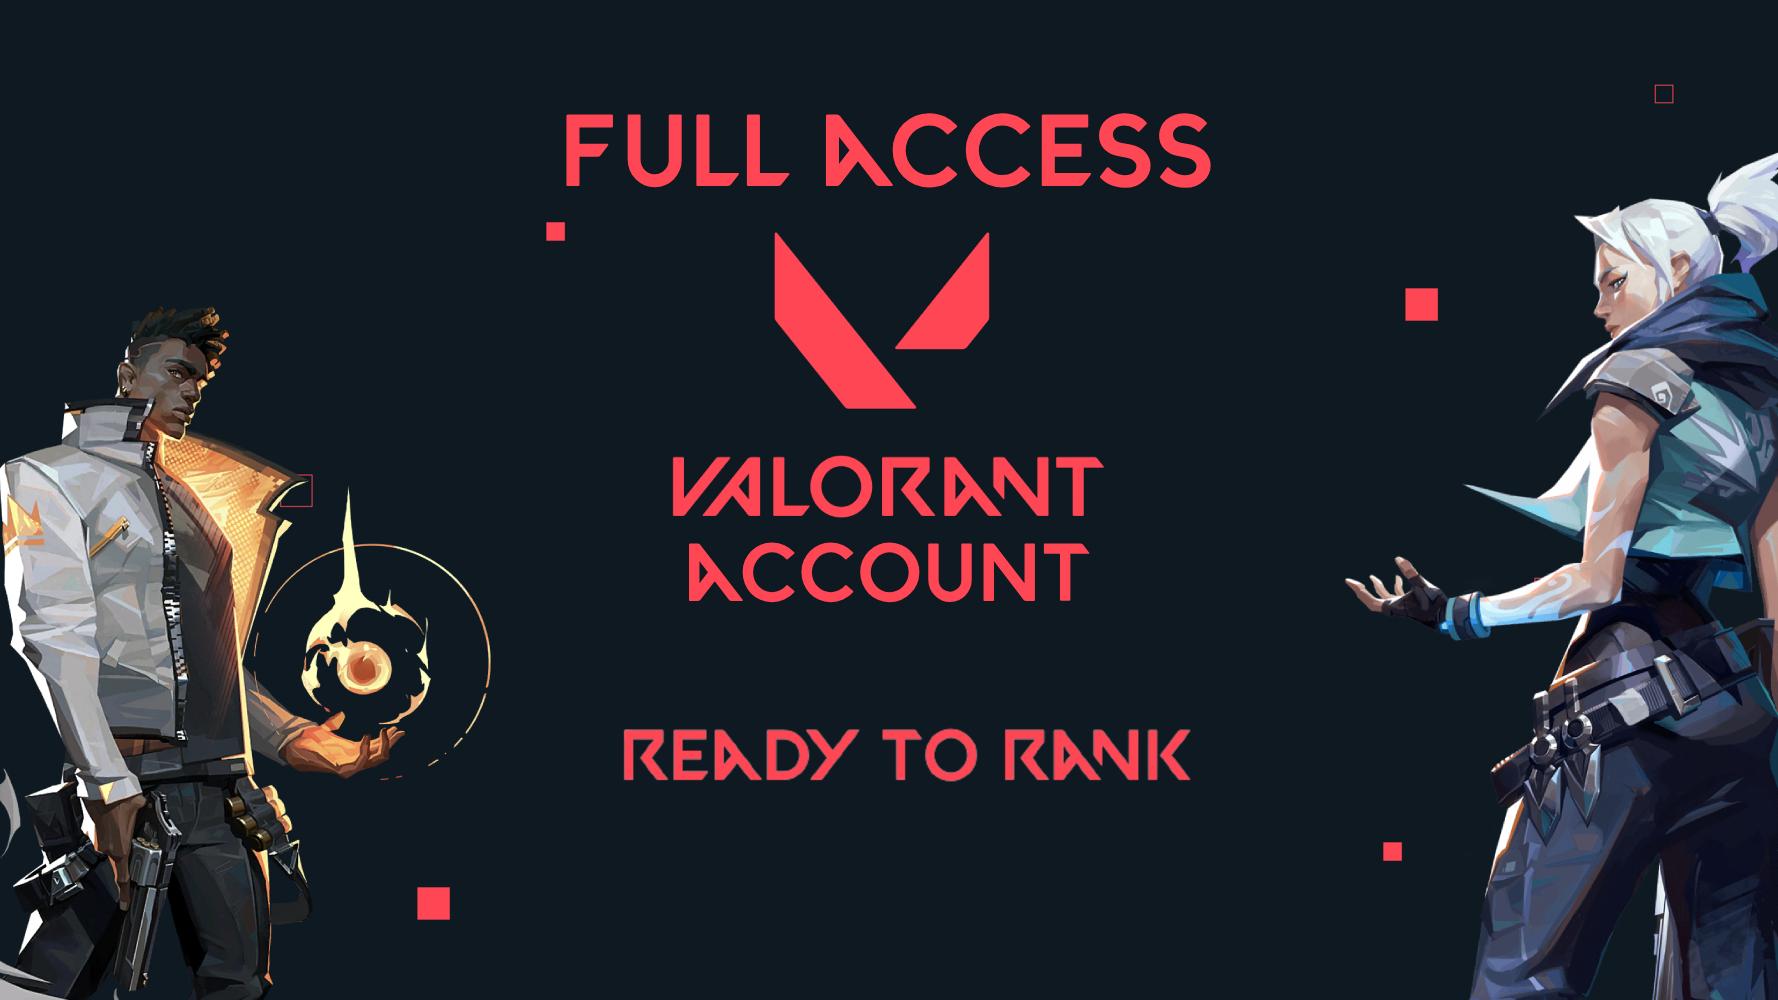 【LAN】Ranked Ready VALORANT Smurf Account ✅ | EP 6 ACT 3 ✅ Competitive Unlocked ✅ | Full Change Data